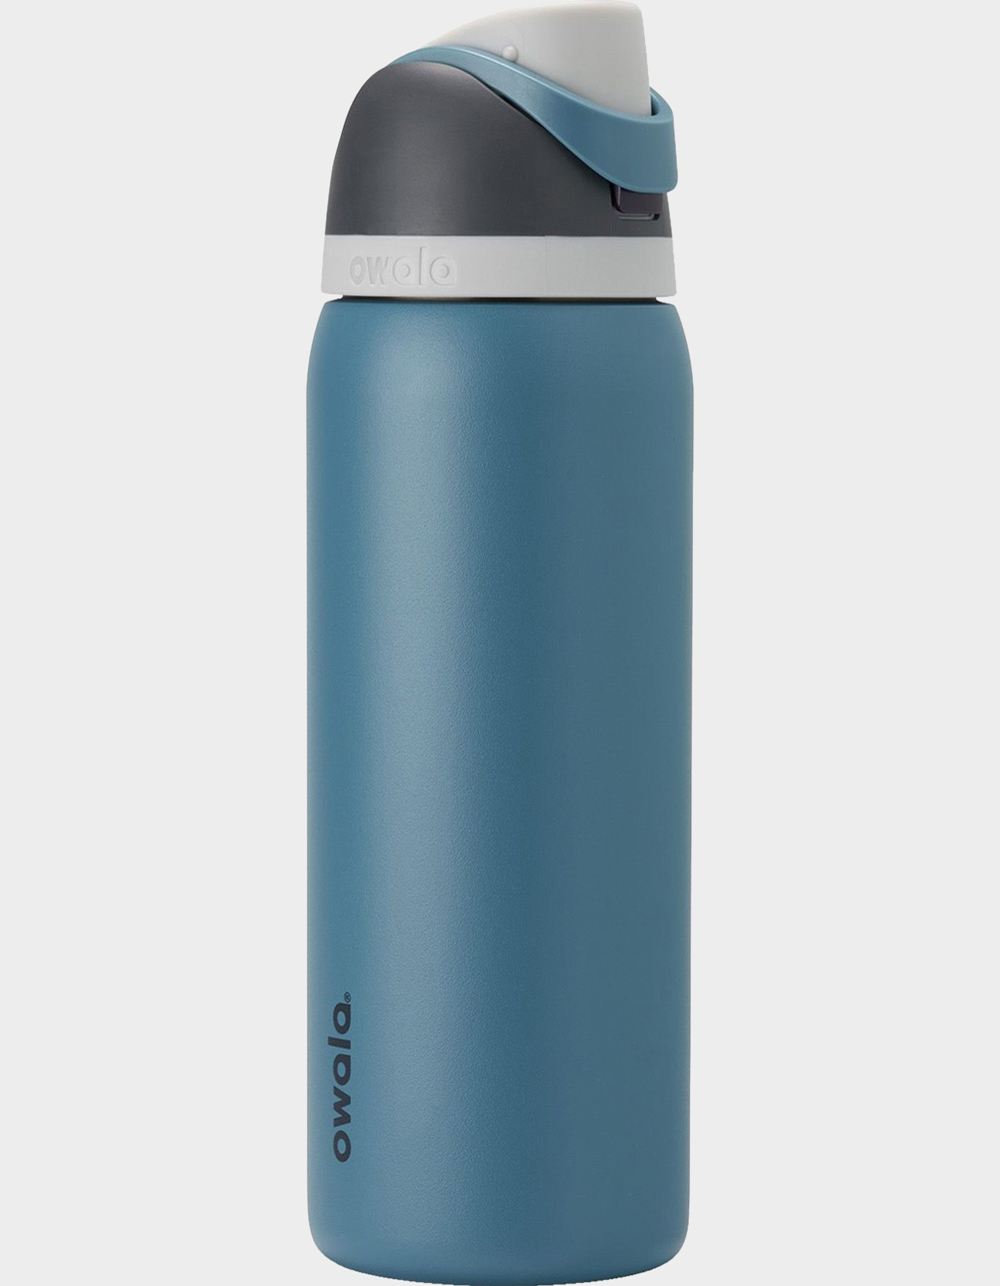 FreeSip 32 oz. Insulated Stainless Steel Water Bottle, Blue or Black